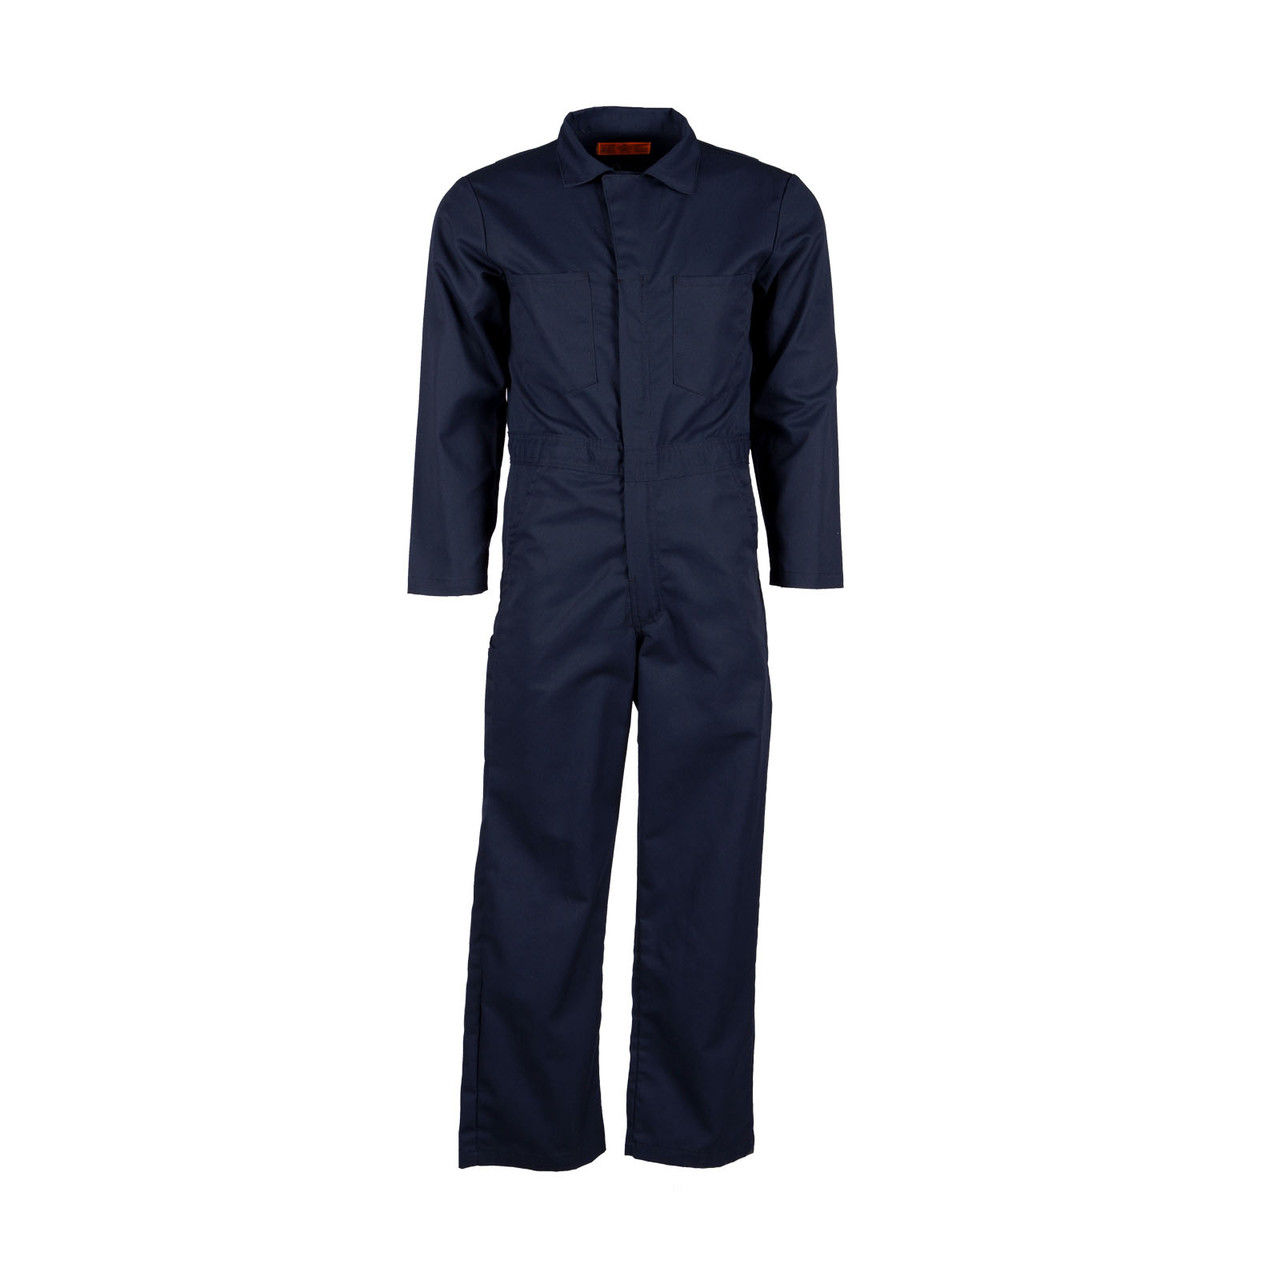 What is the color specification of the CV10NV navy coveralls by Pinnacle Textile?